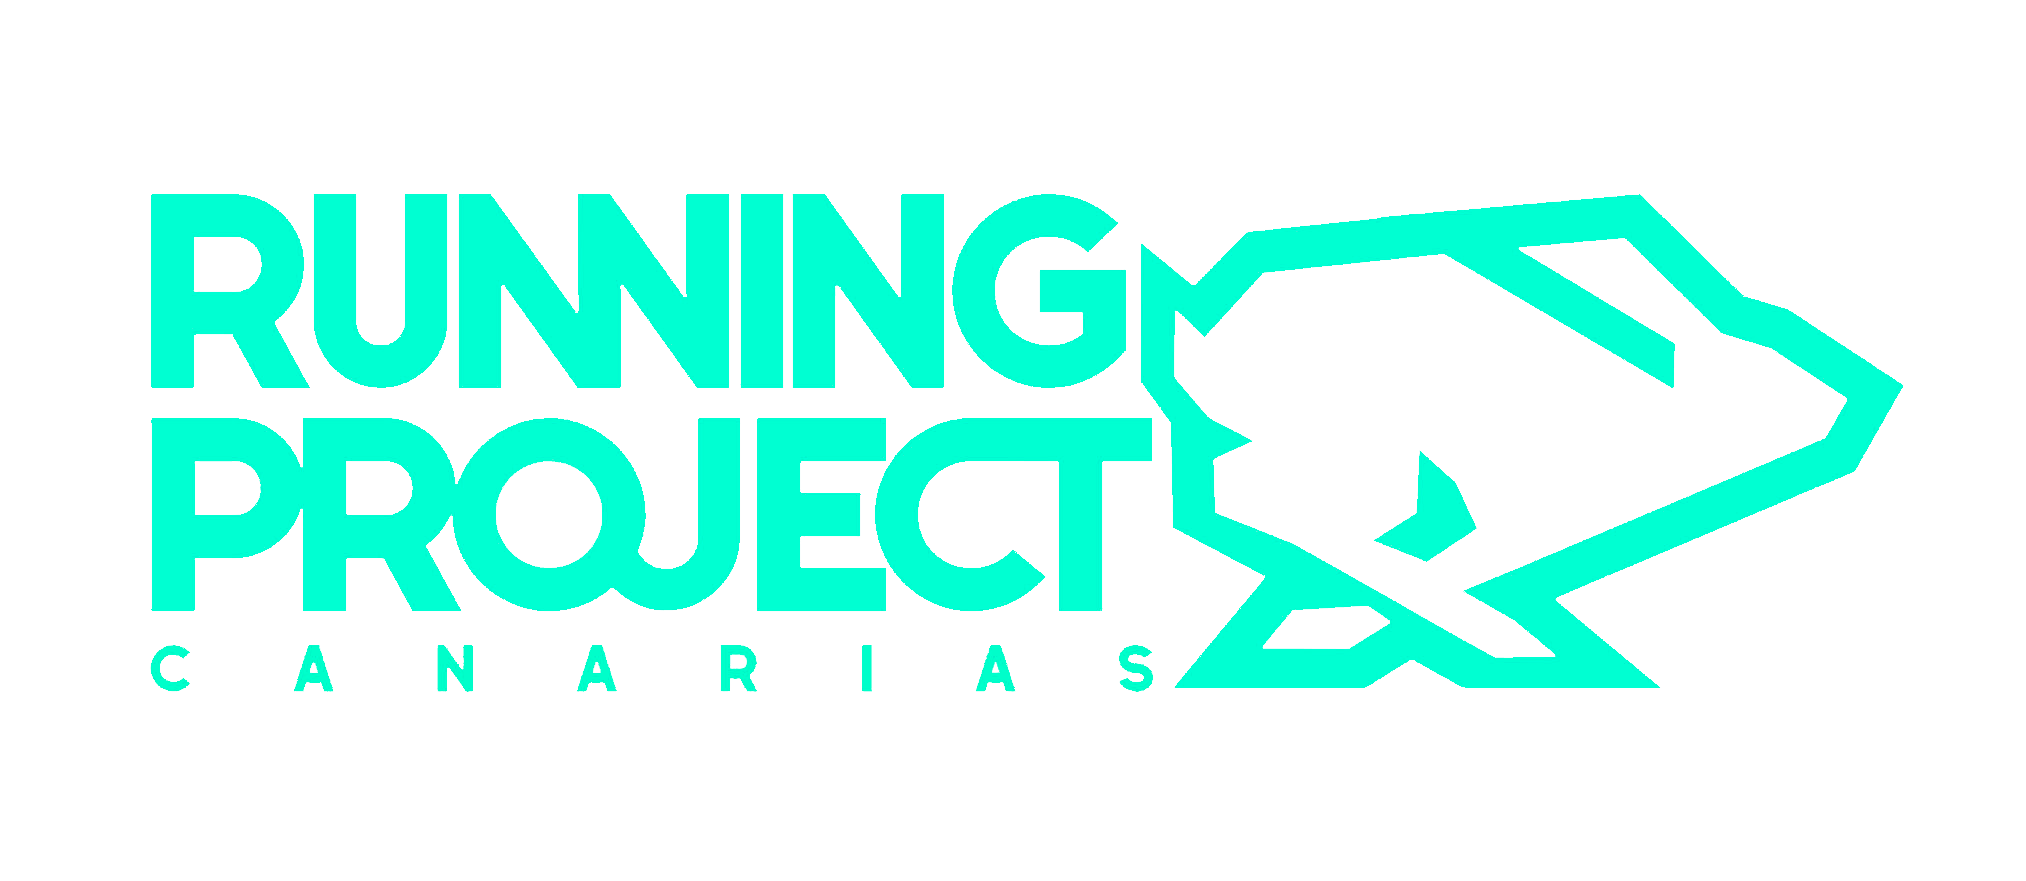 Running Project Canarias